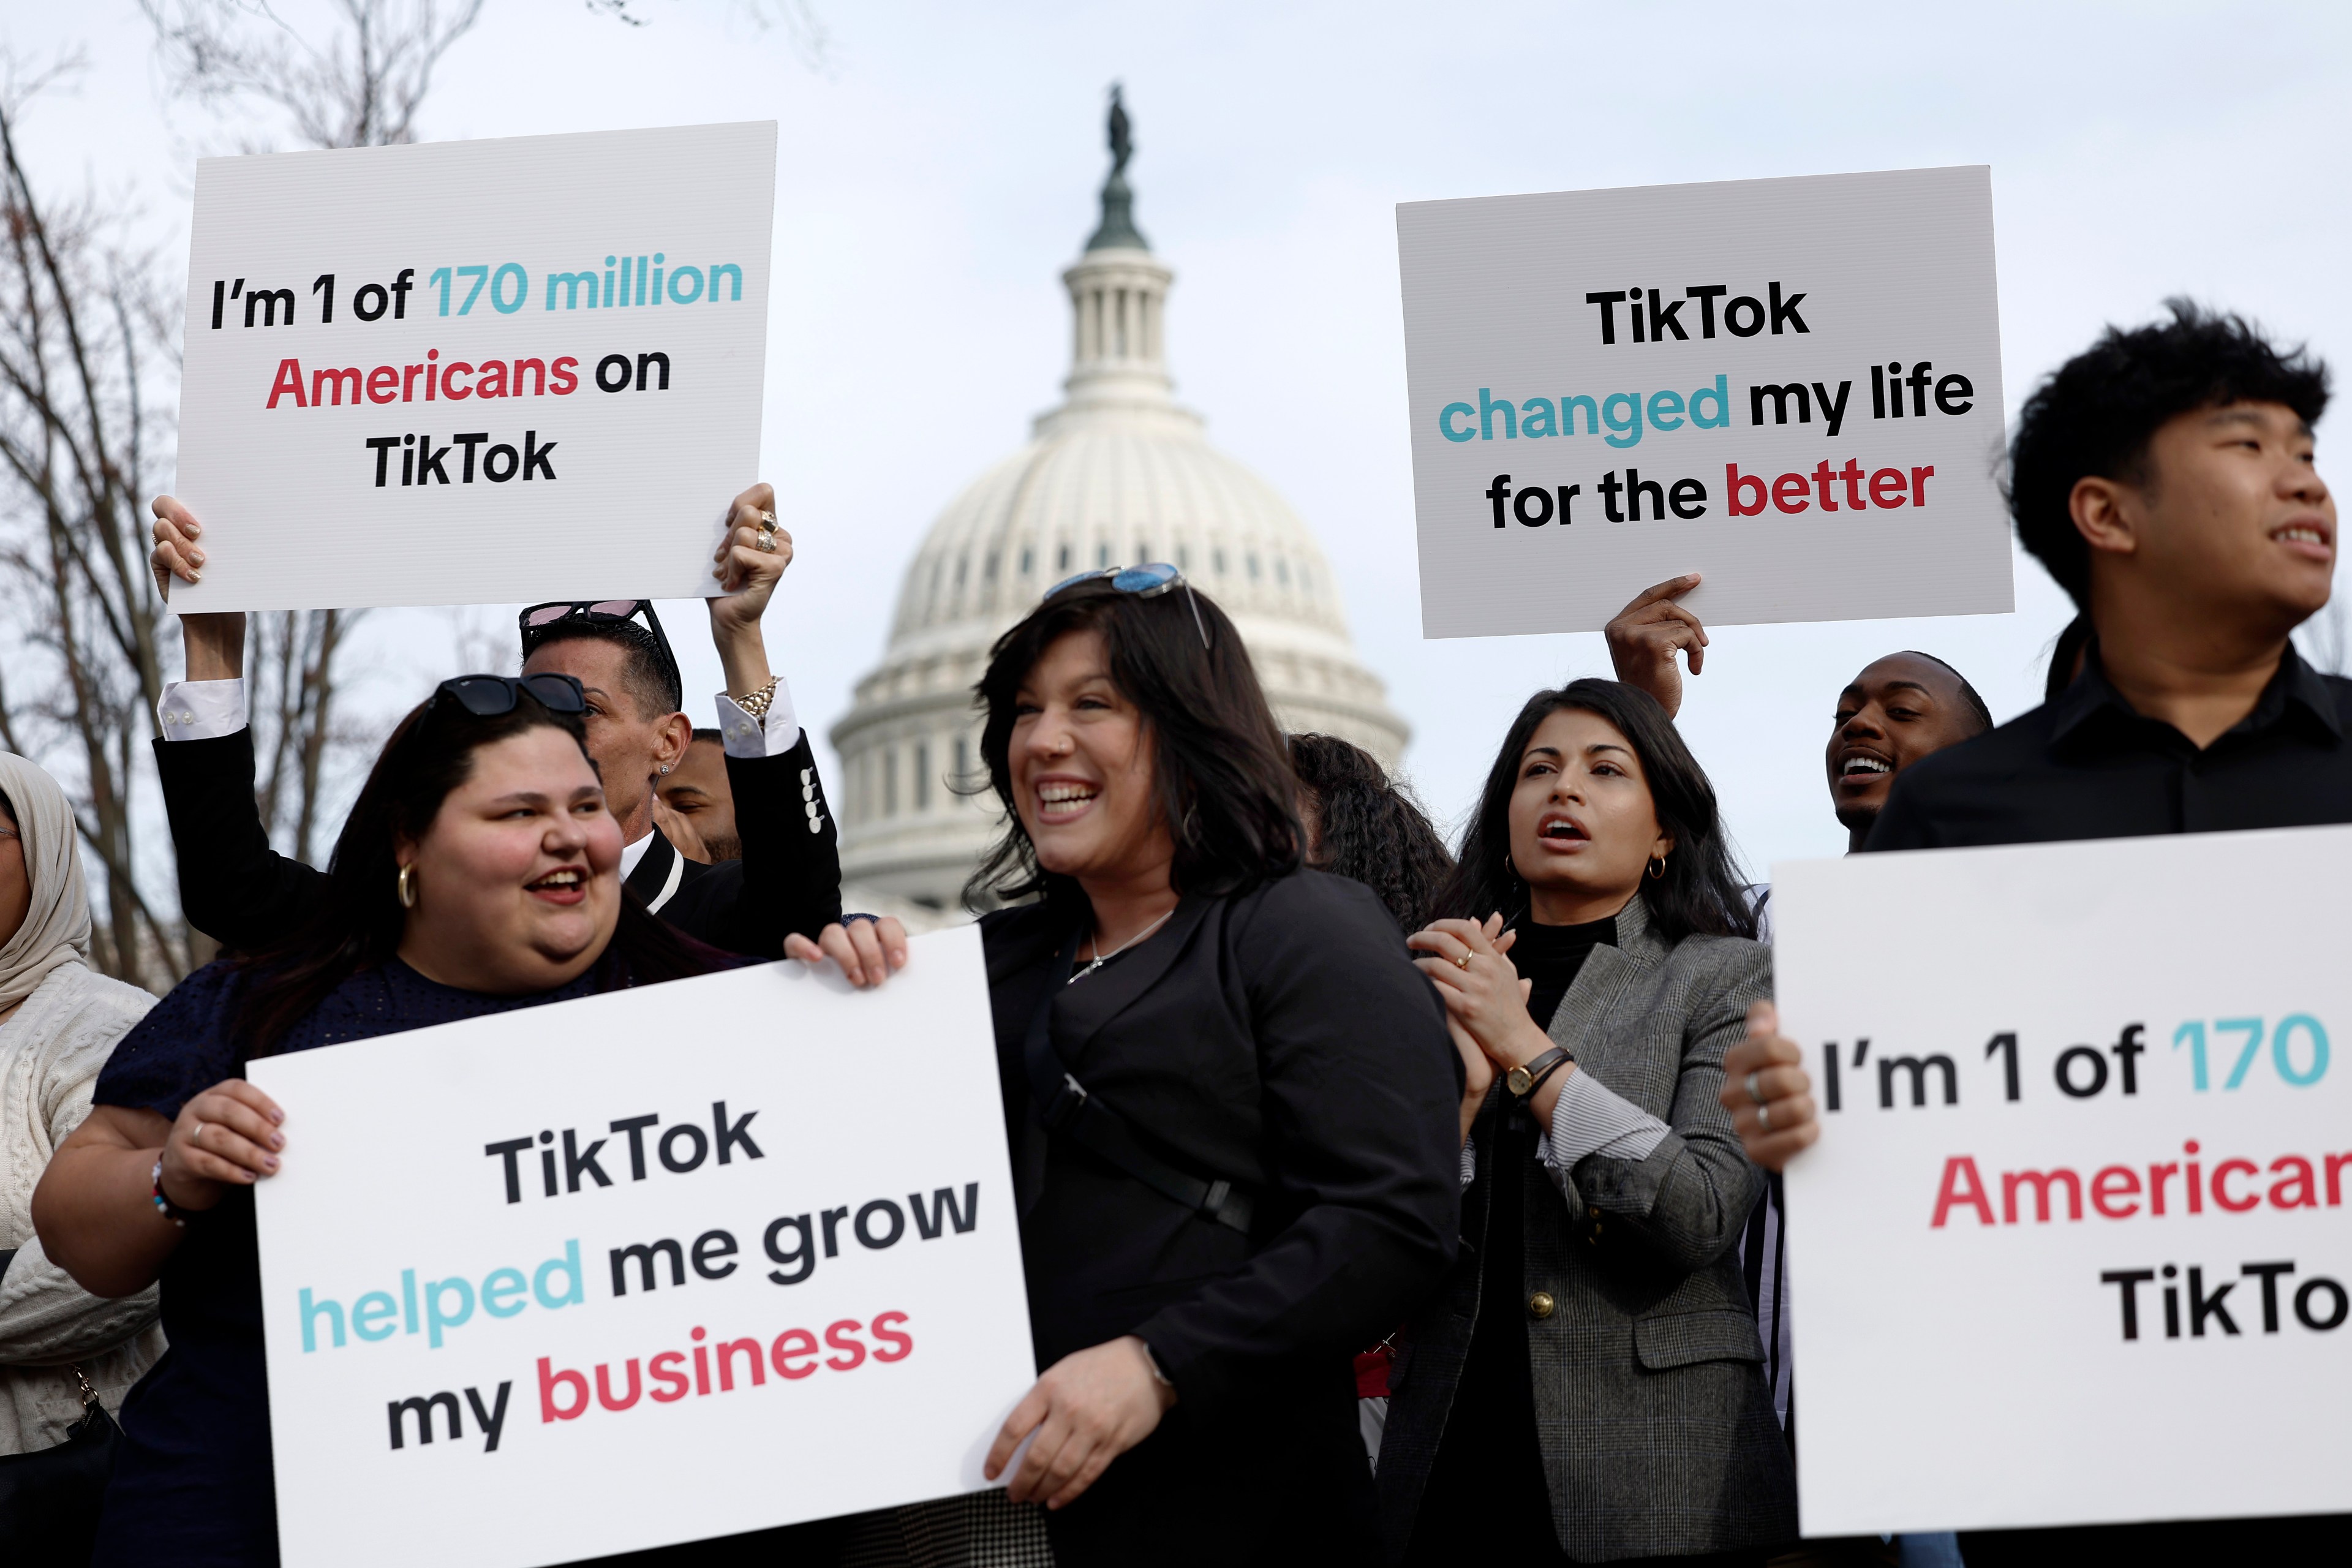 People hold signs praising TikTok outside the domed U.S. Capitol building.